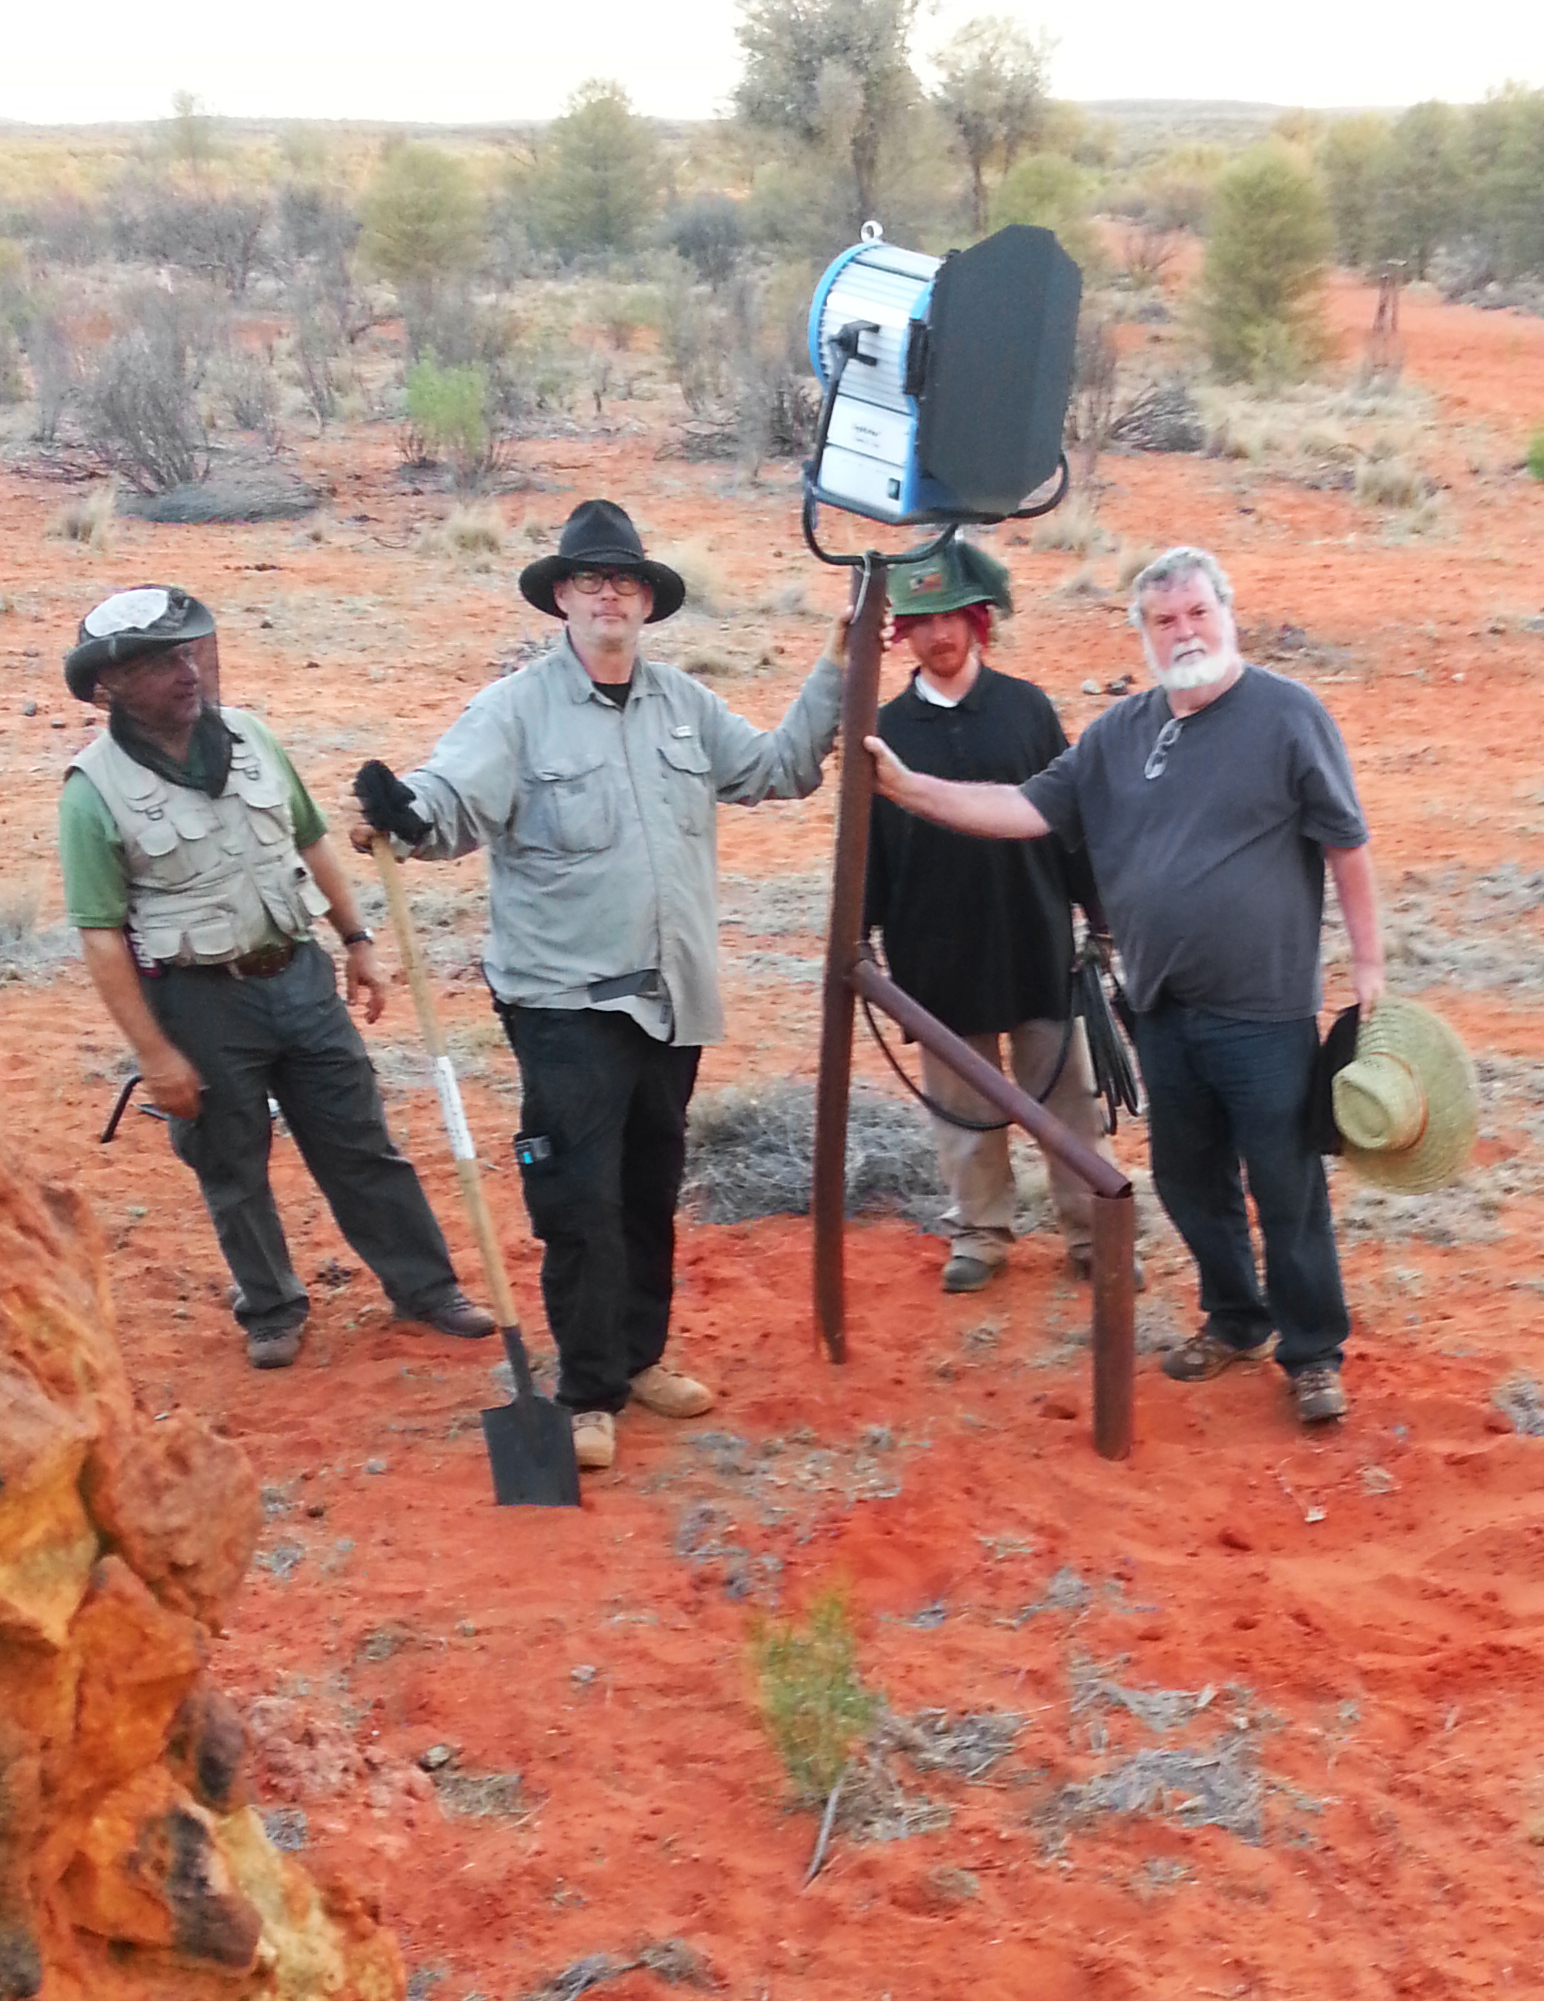 In the Australian outback with Dean Cundey A.S.C. 2013